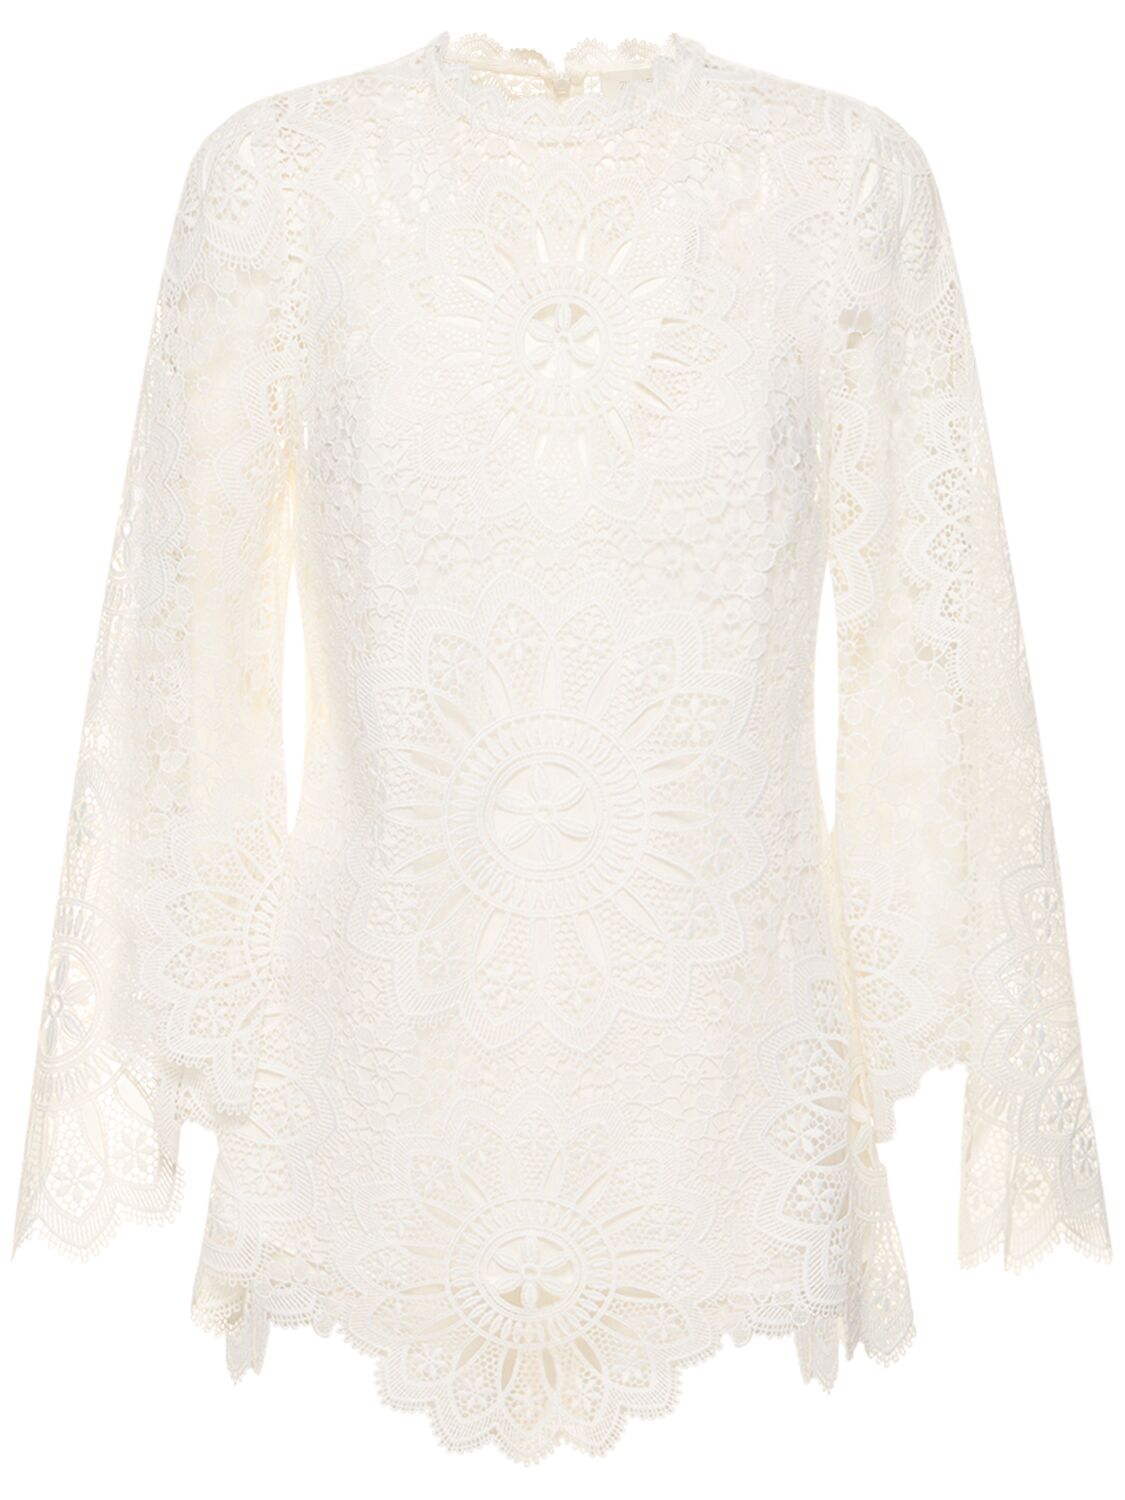 Image of Chintz Doily Lace Long Sleeve Top